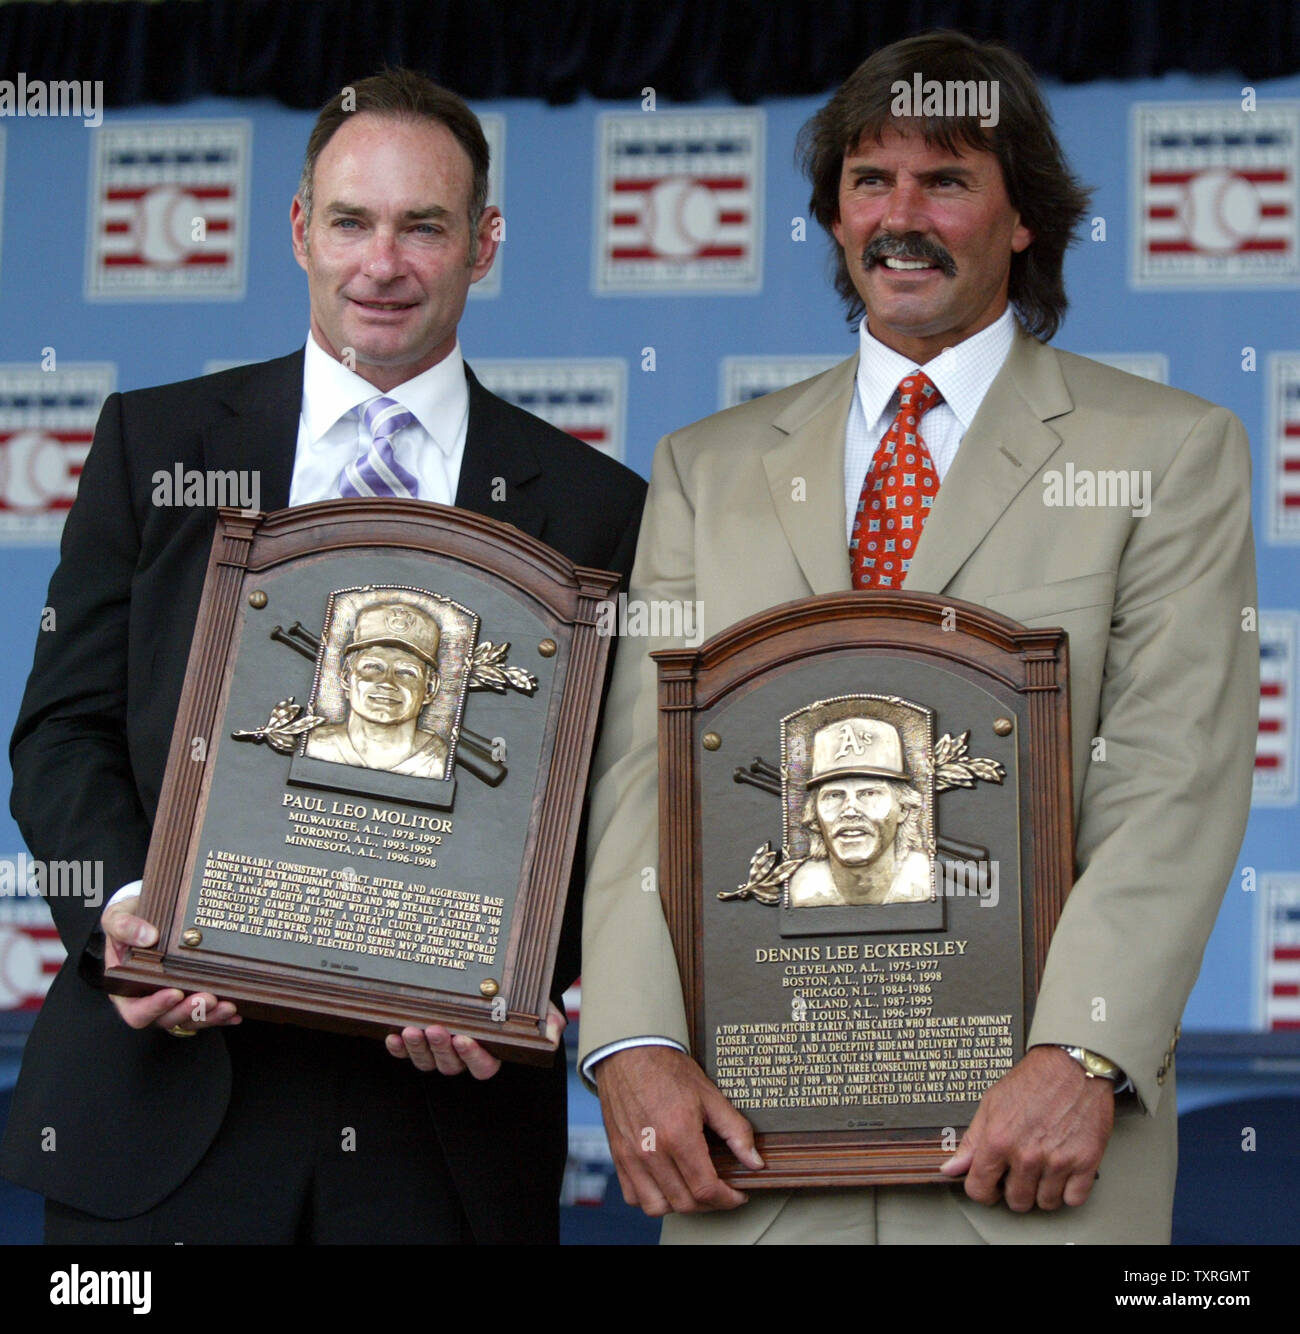 Newly elected Baseball Hall of Fame members Paul Molitorr (L) and Dennis Eckersley proudly show off their new placques following their induction ceremony in Cooperstown, NY on July 25, 2004.  (UPI Photo/Bill Greenblatt) Stock Photo